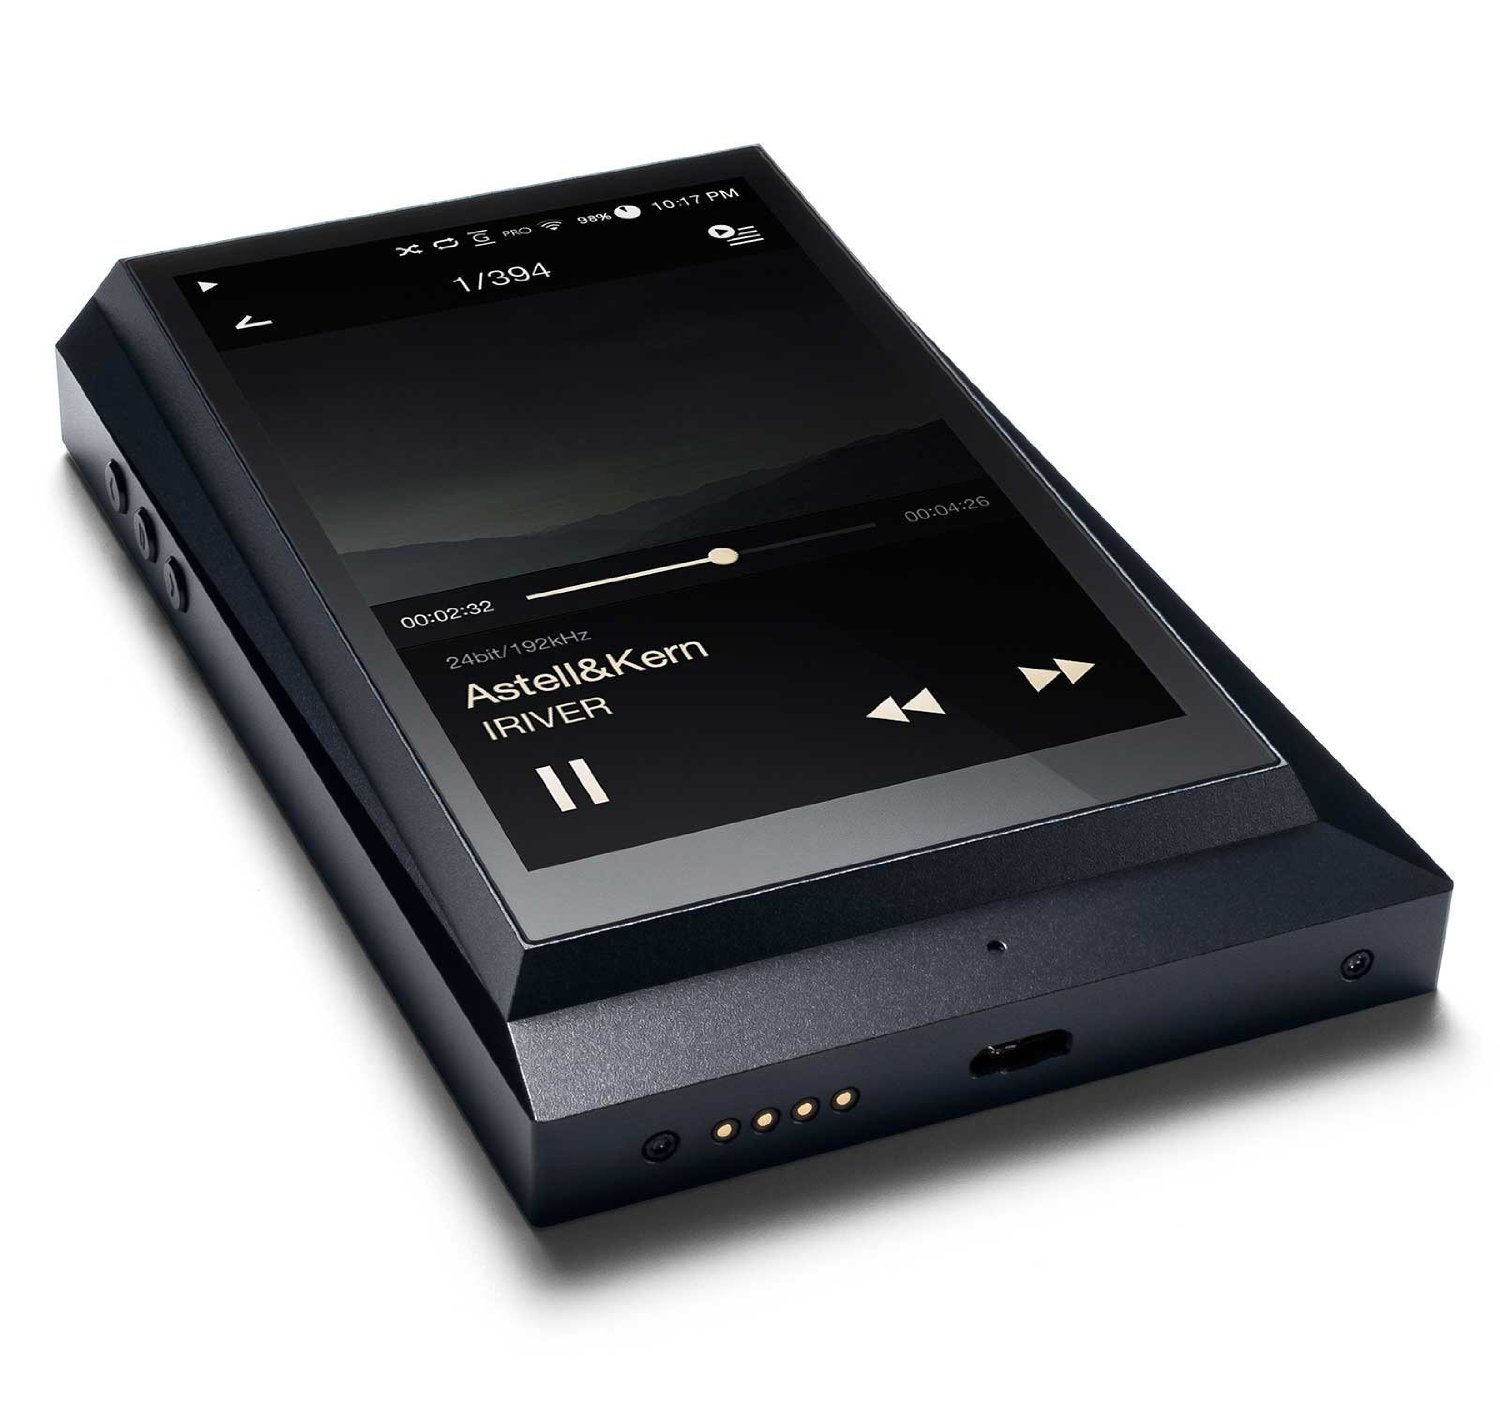 Astell & Kern AK300 High-resolution Mastering Quality Sound Portable System - image 4 of 5